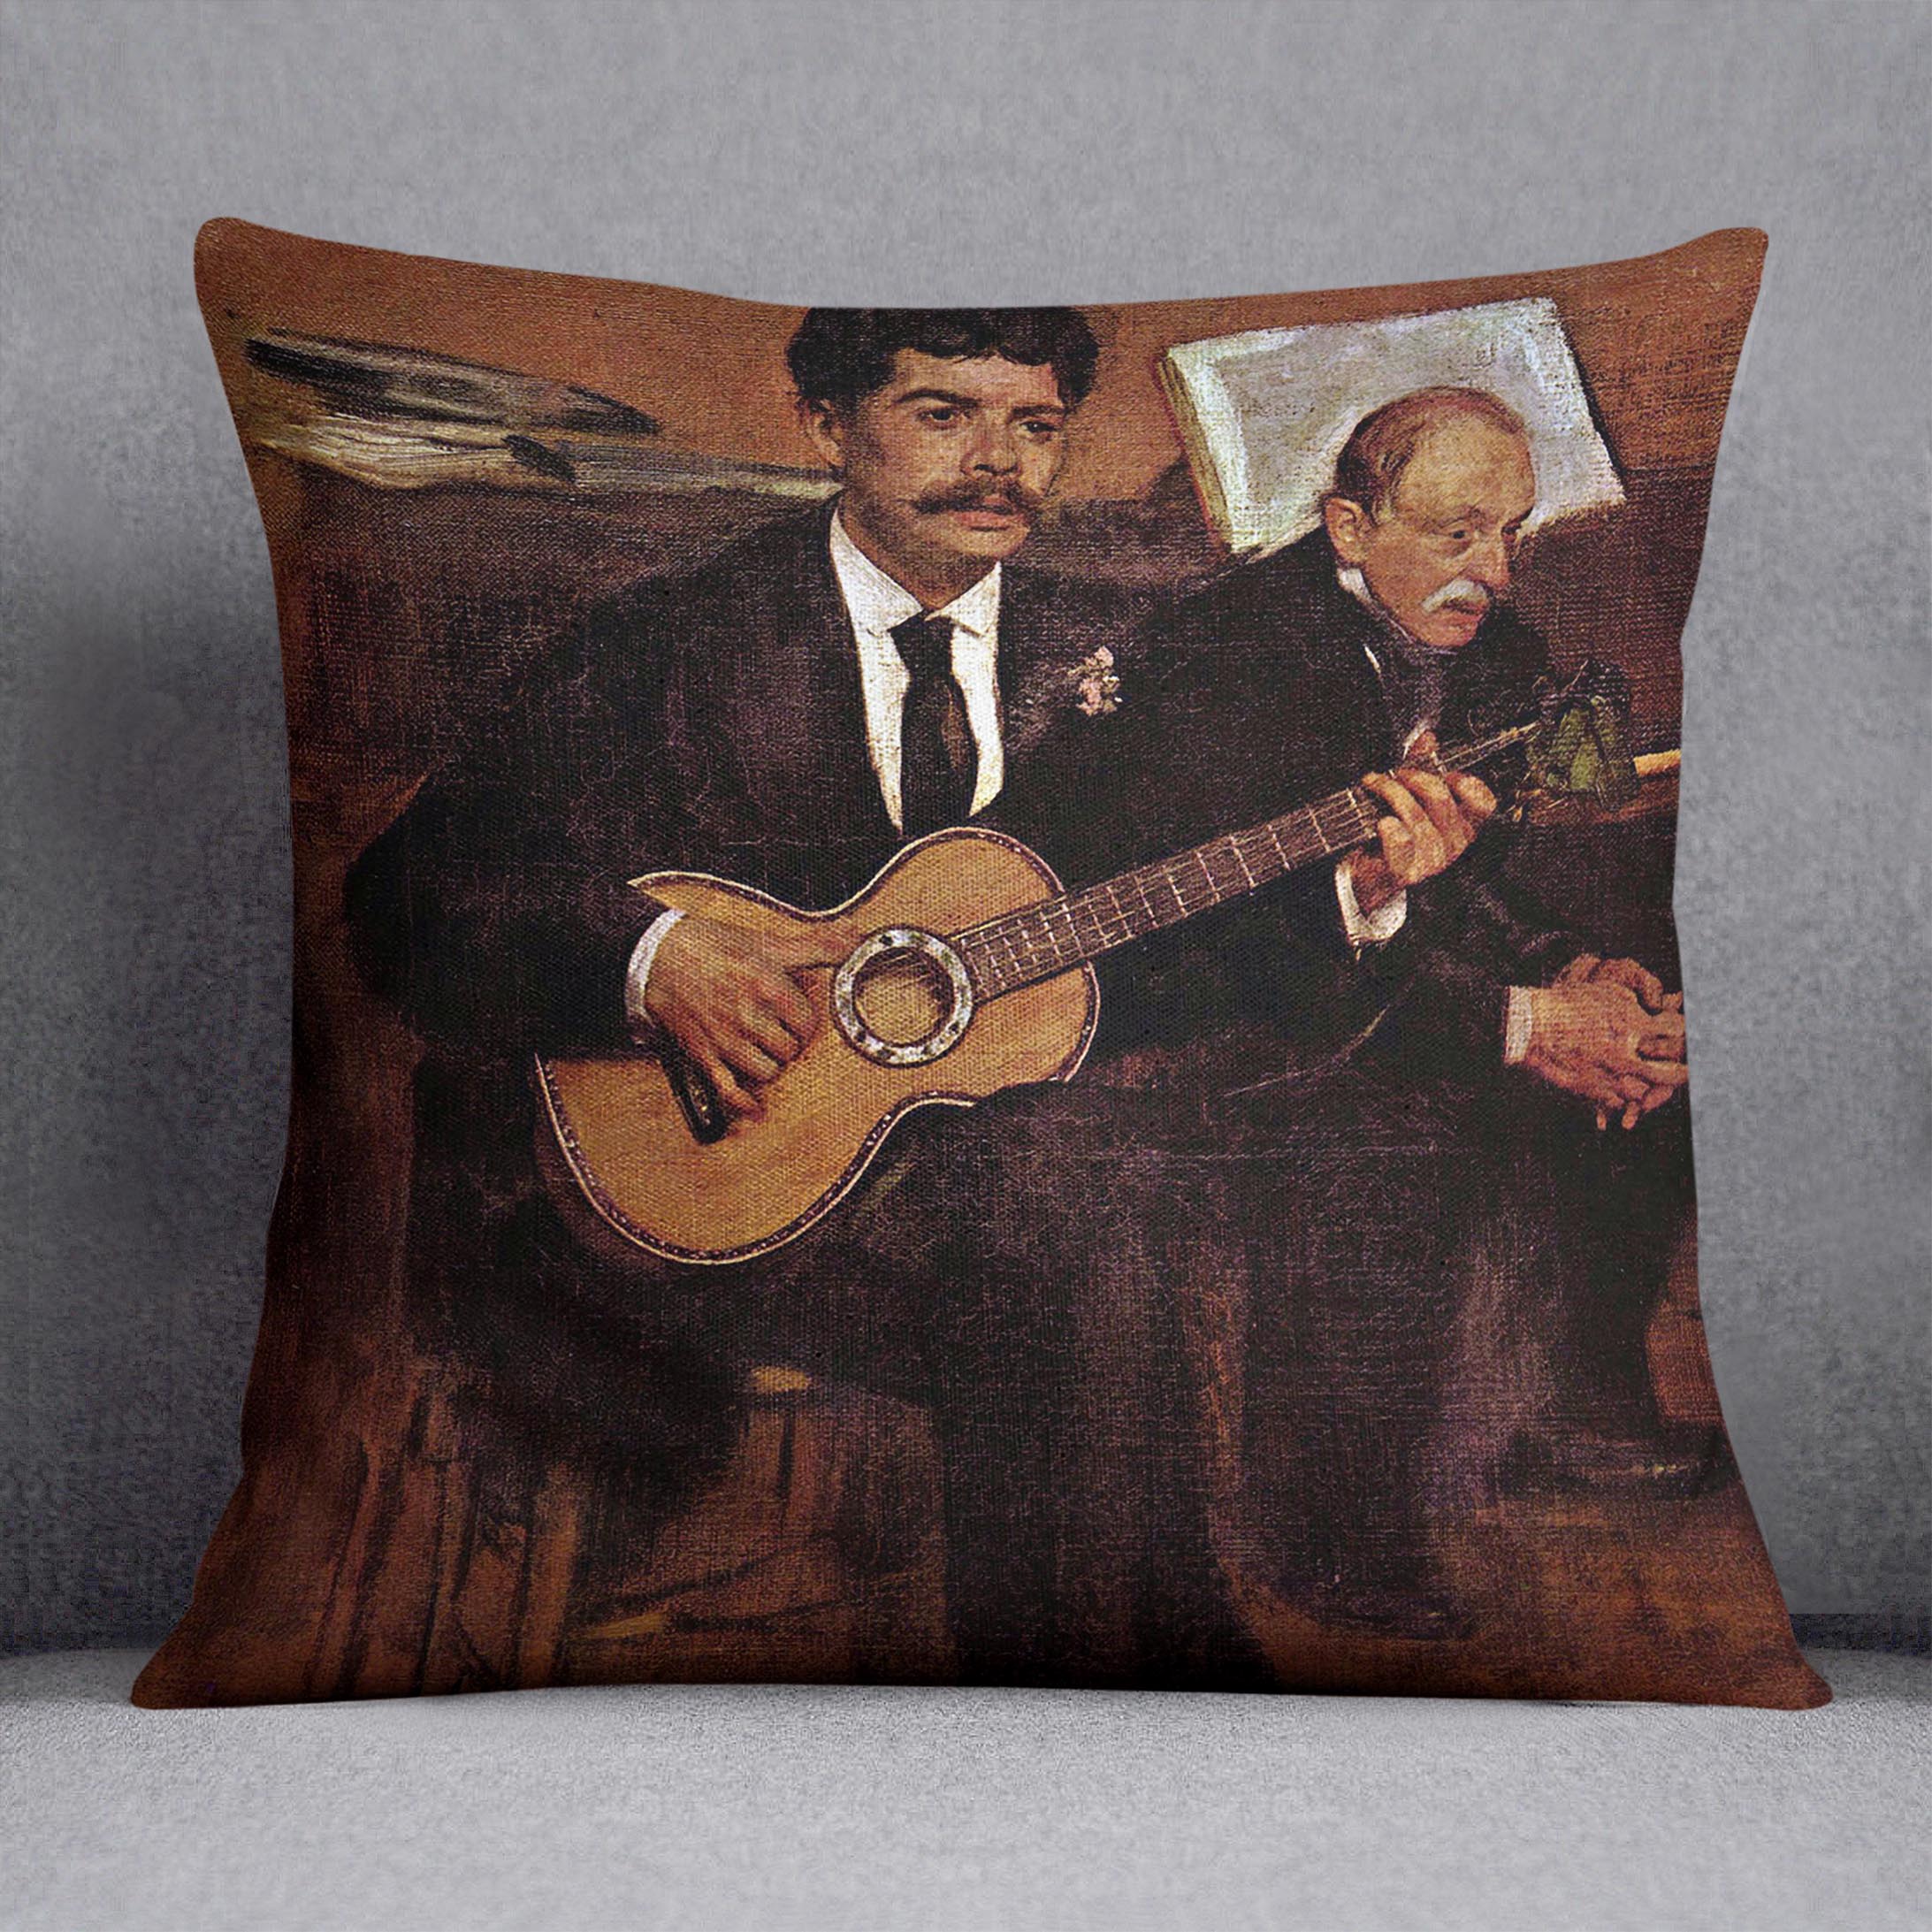 The guitarist Pagans and Monsieur Degas by Manet Cushion